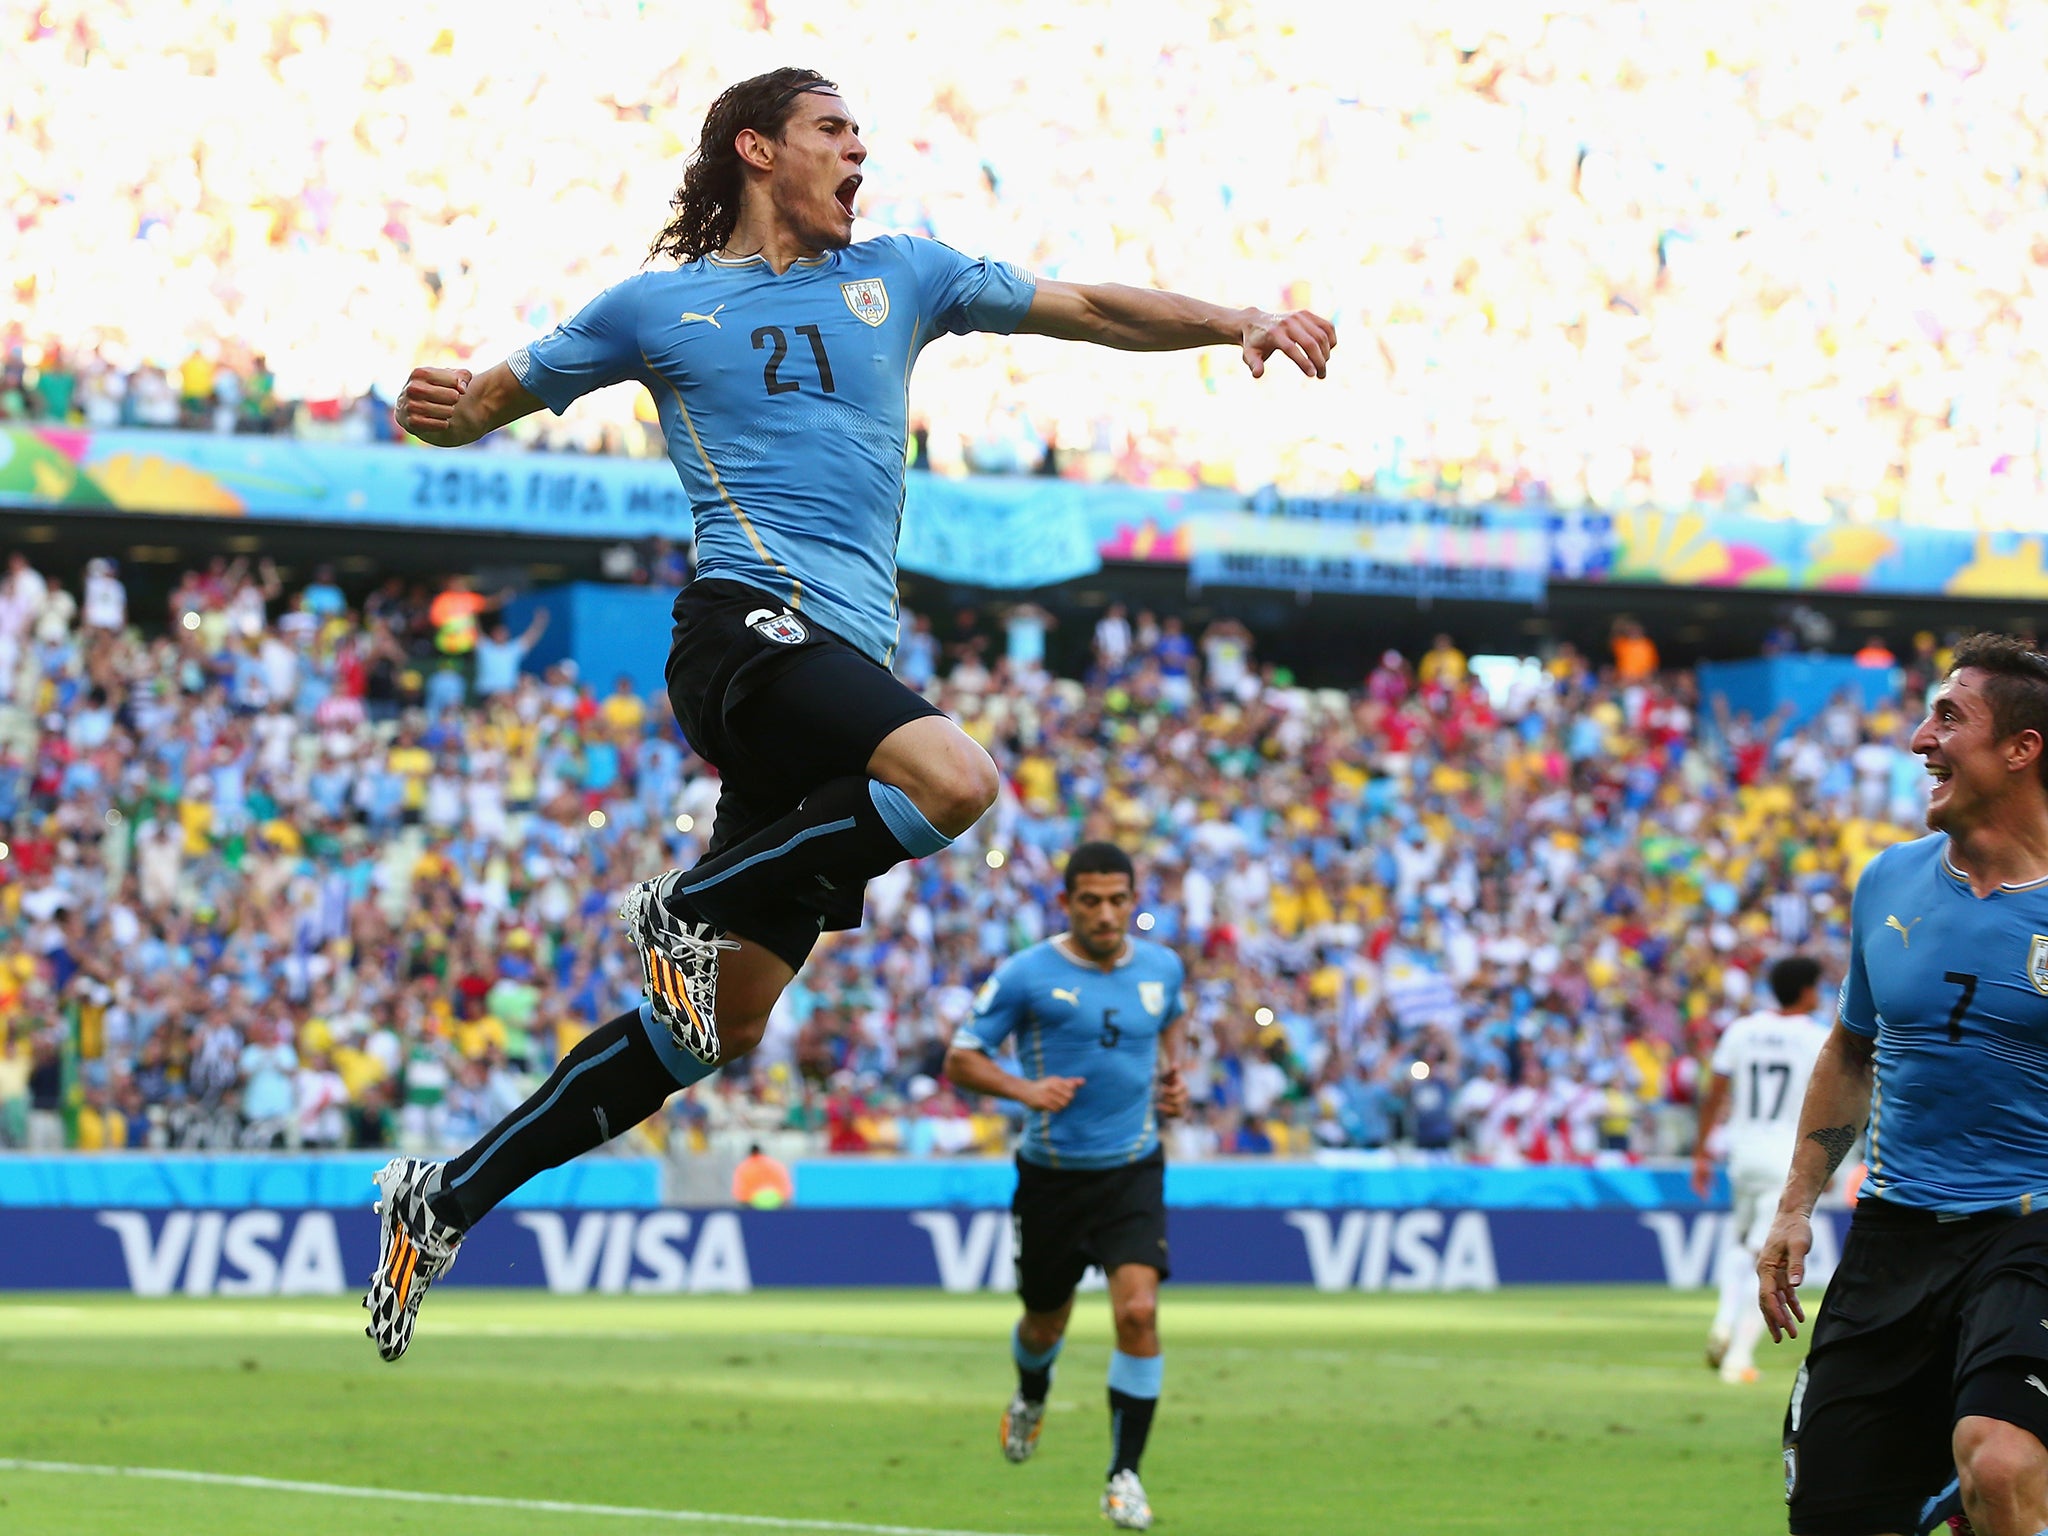 Liverpool have made an approach for Edinson Cavani, according to his agent